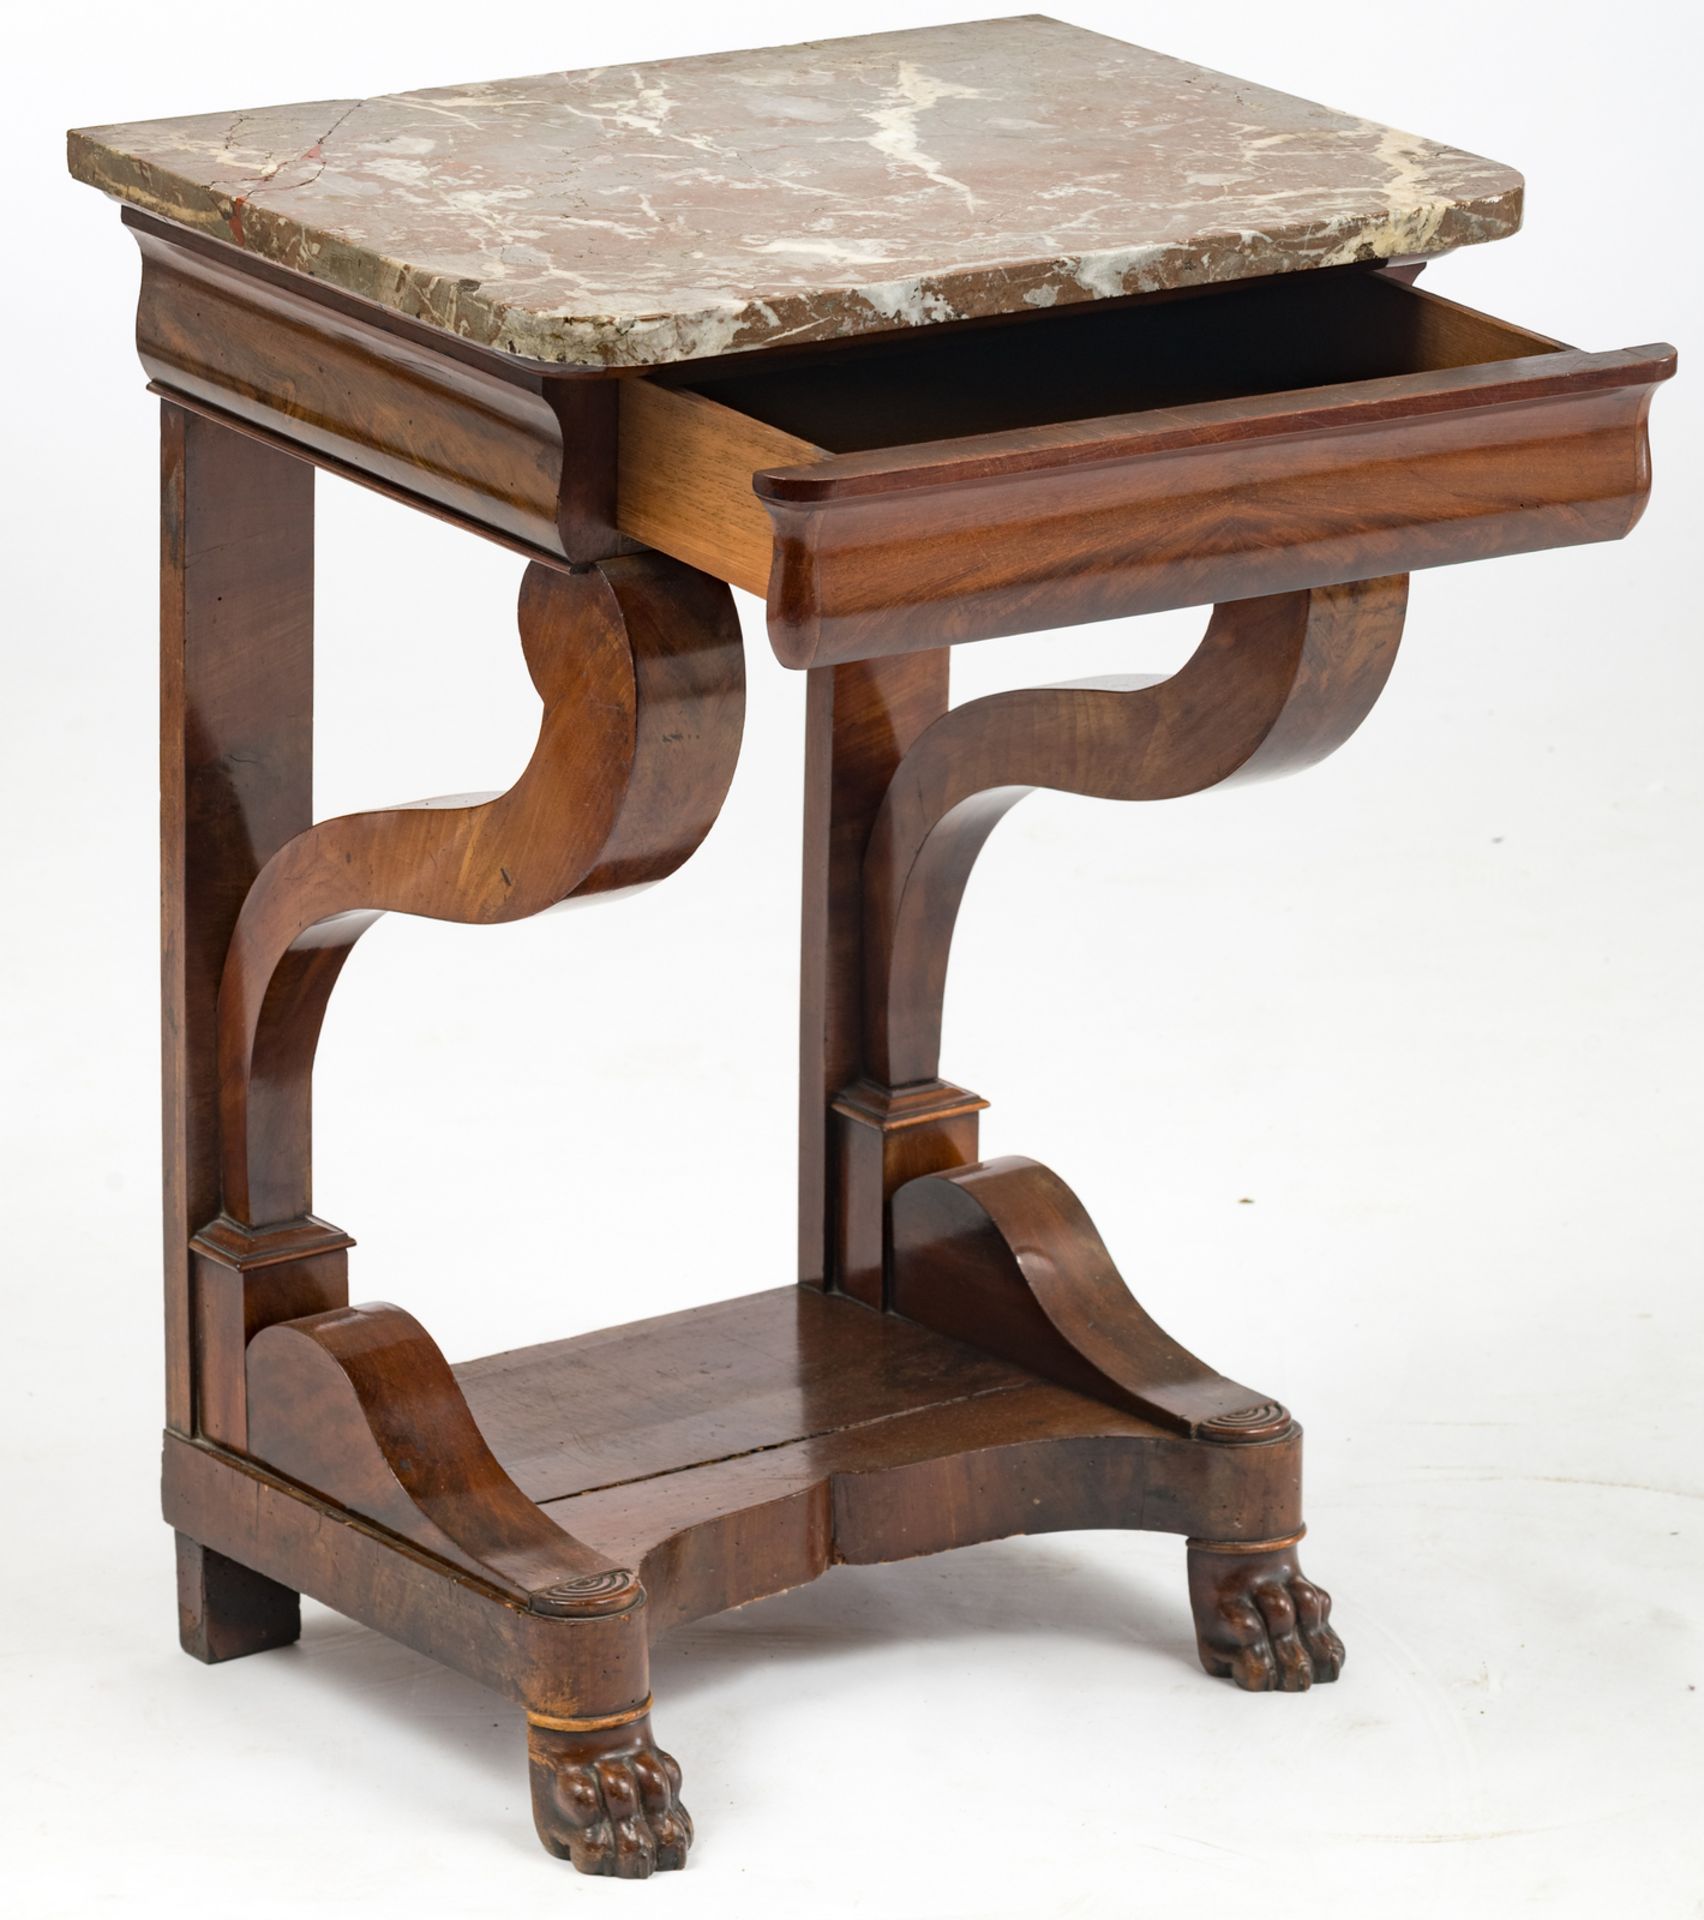 Louis Philippe mahogany console table with paw feet and marble top, H 79 - W 57,5 - D 42,5 cm - Image 10 of 10